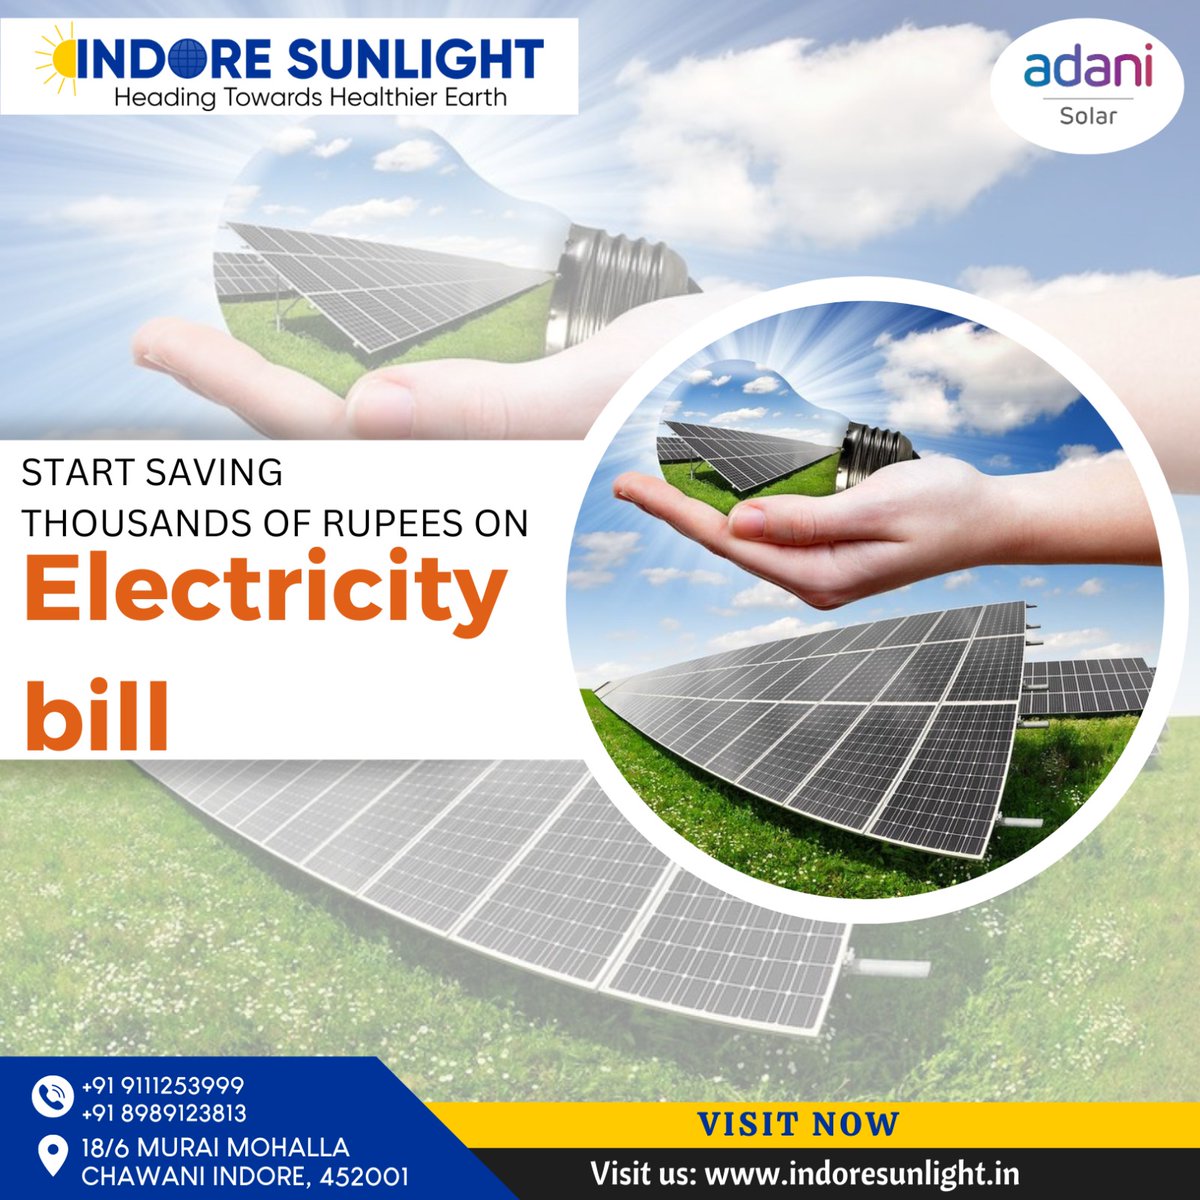 Make the switch to solar and start saving thousands of rupees on electricity bills! Harness the power of the sun to slash your energy costs and embrace a brighter, more sustainable future. ☀️💰 #SolarSavings
.
.
#SolarSavings #SaveOnElectricity #CutCostsGoSolar #SunPoweredSavings